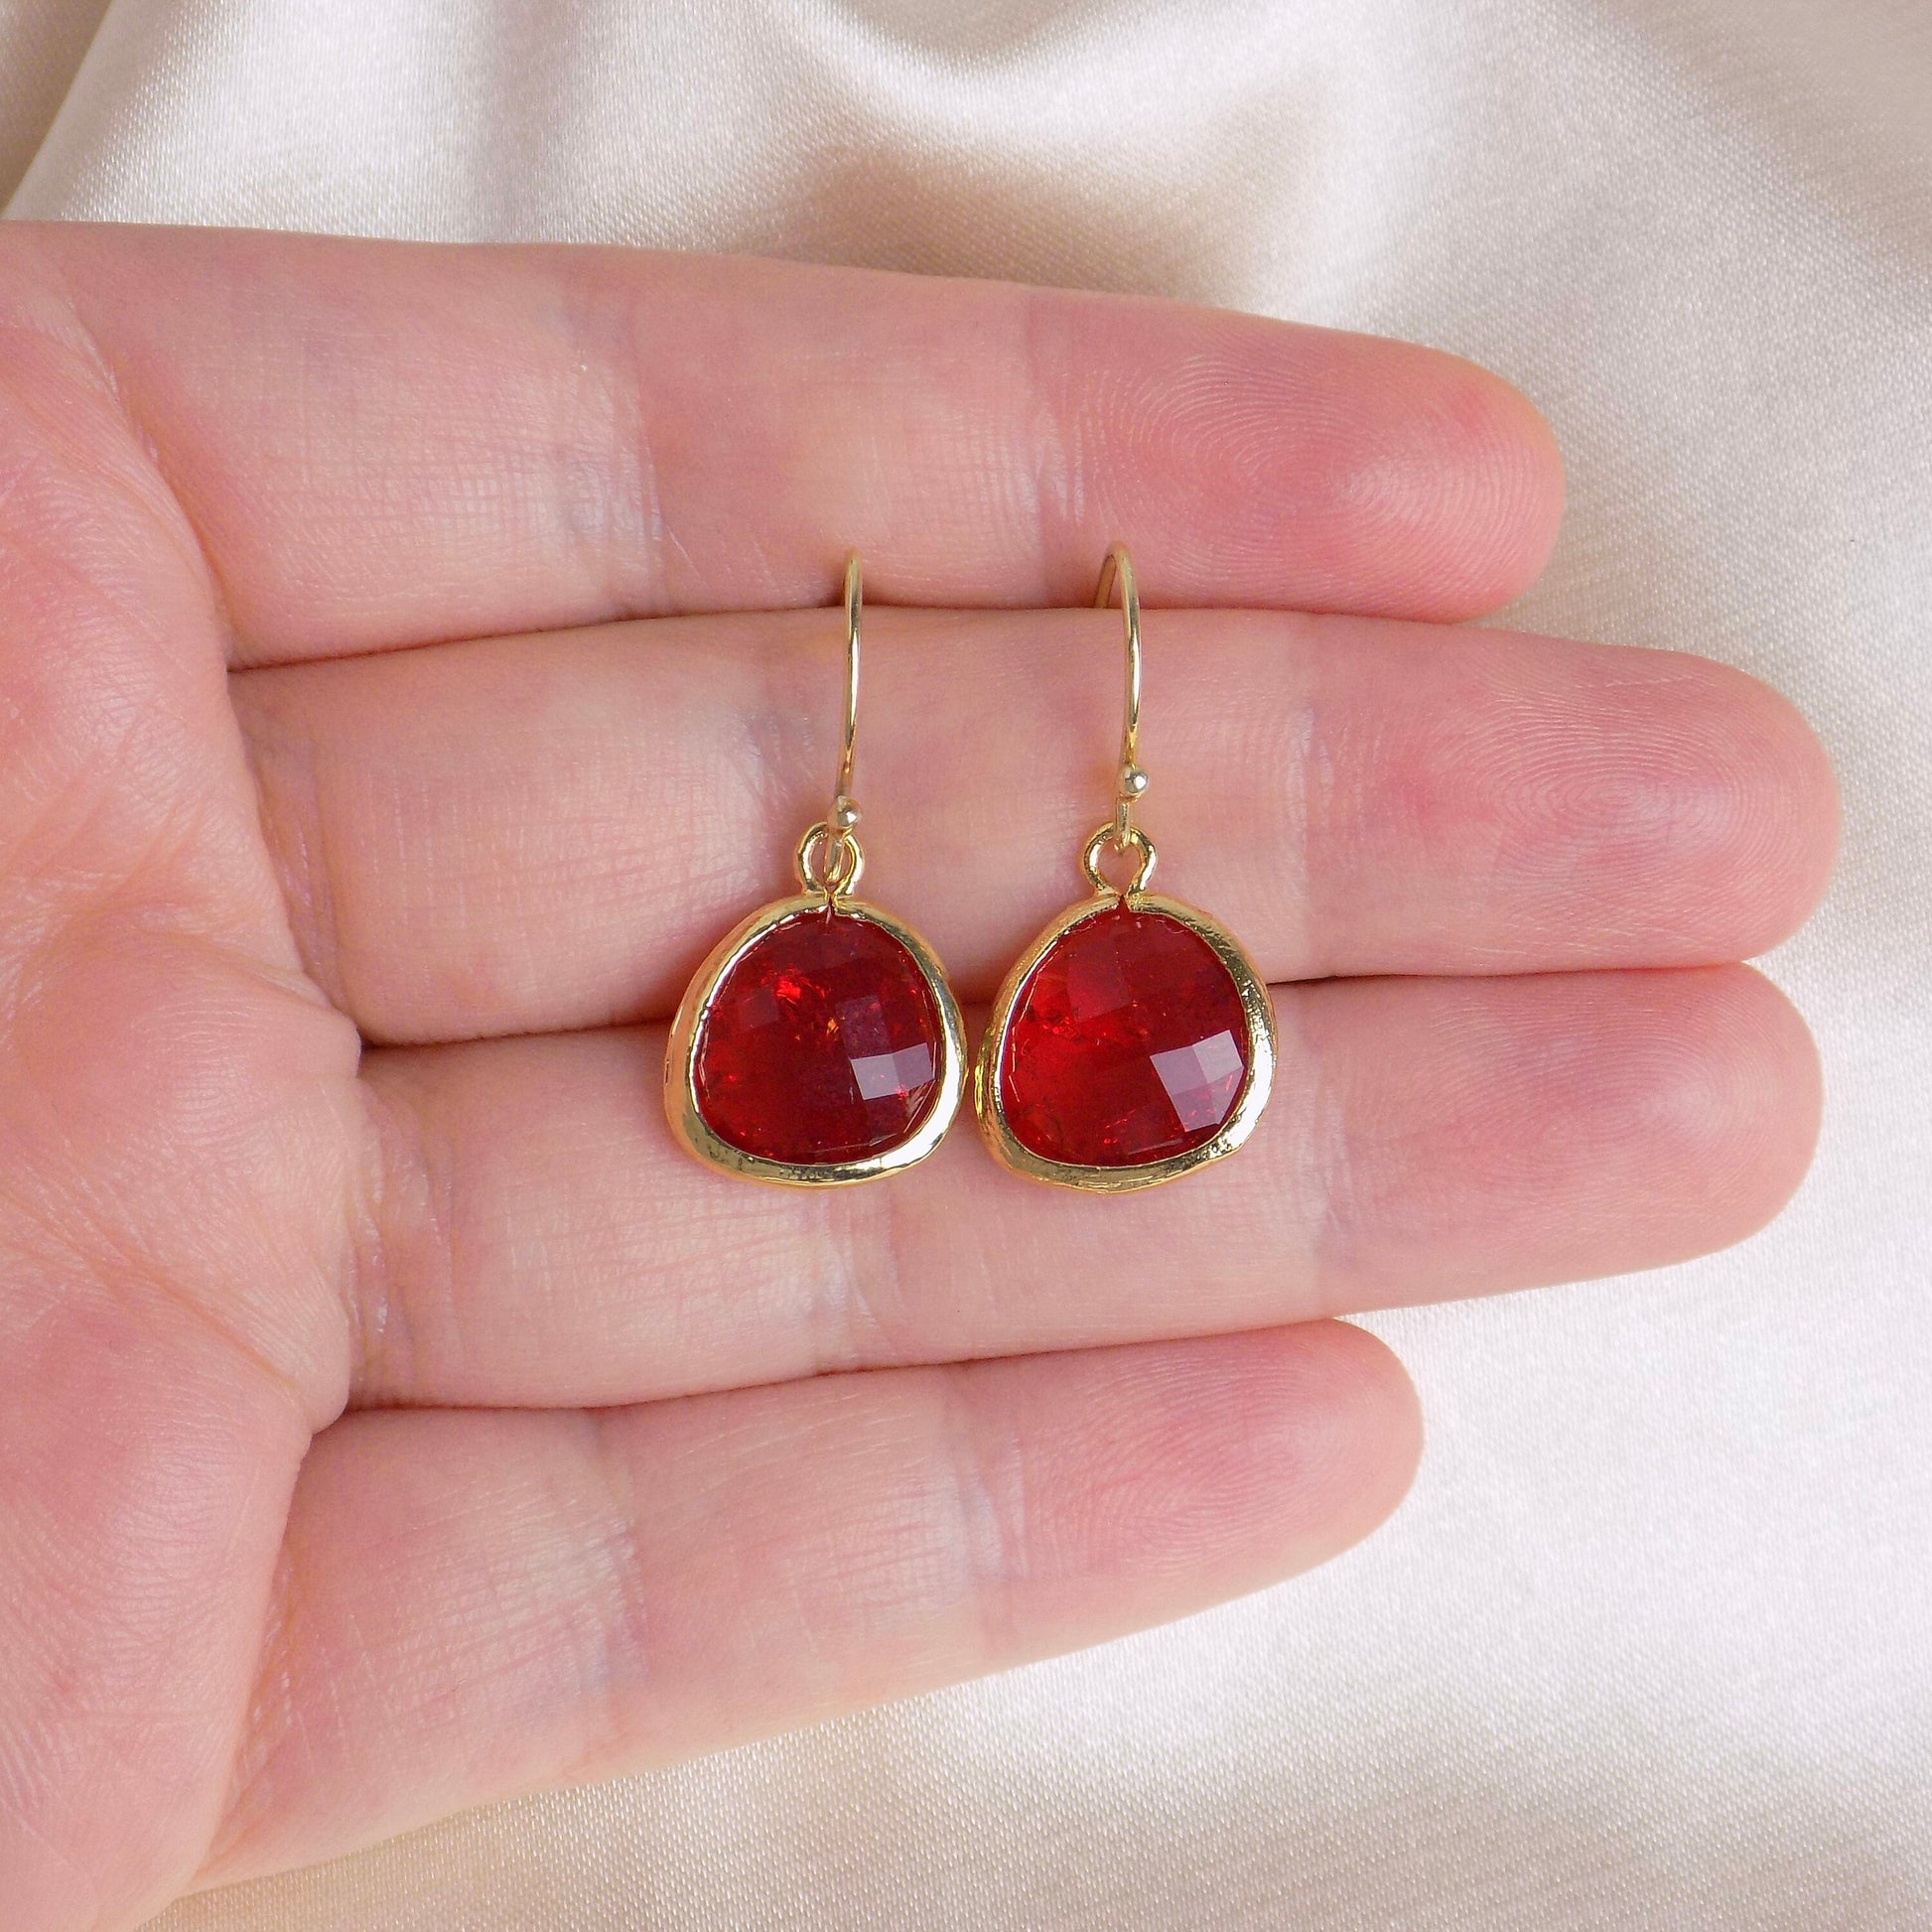 Red Crystal Earrings Gold, Red Stone Earring, Christmas Gift Women, M6-615